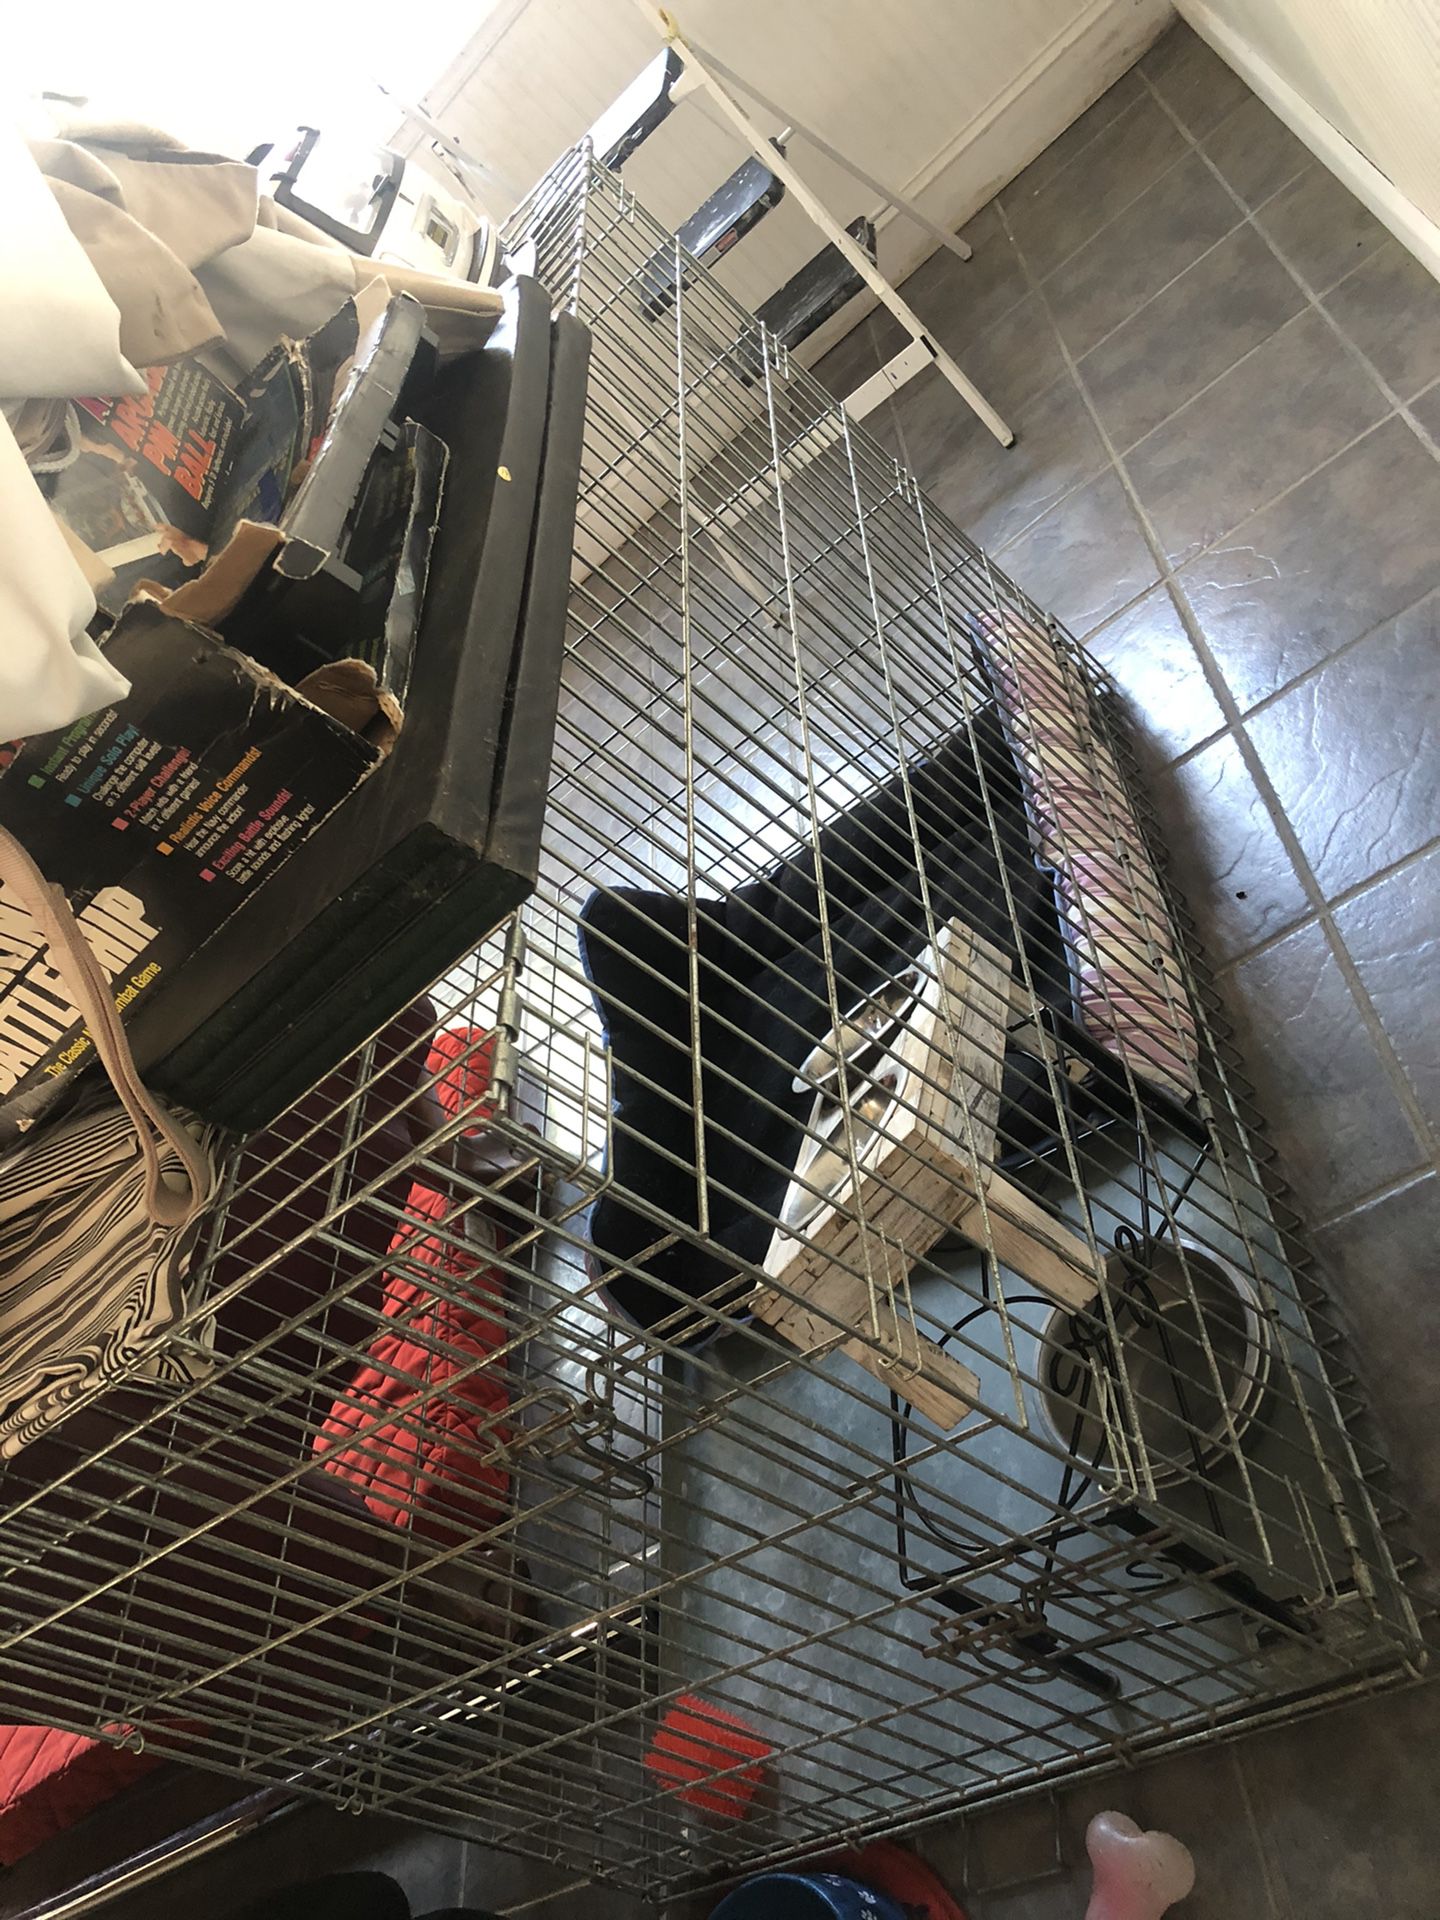 XL dog crate and accessories